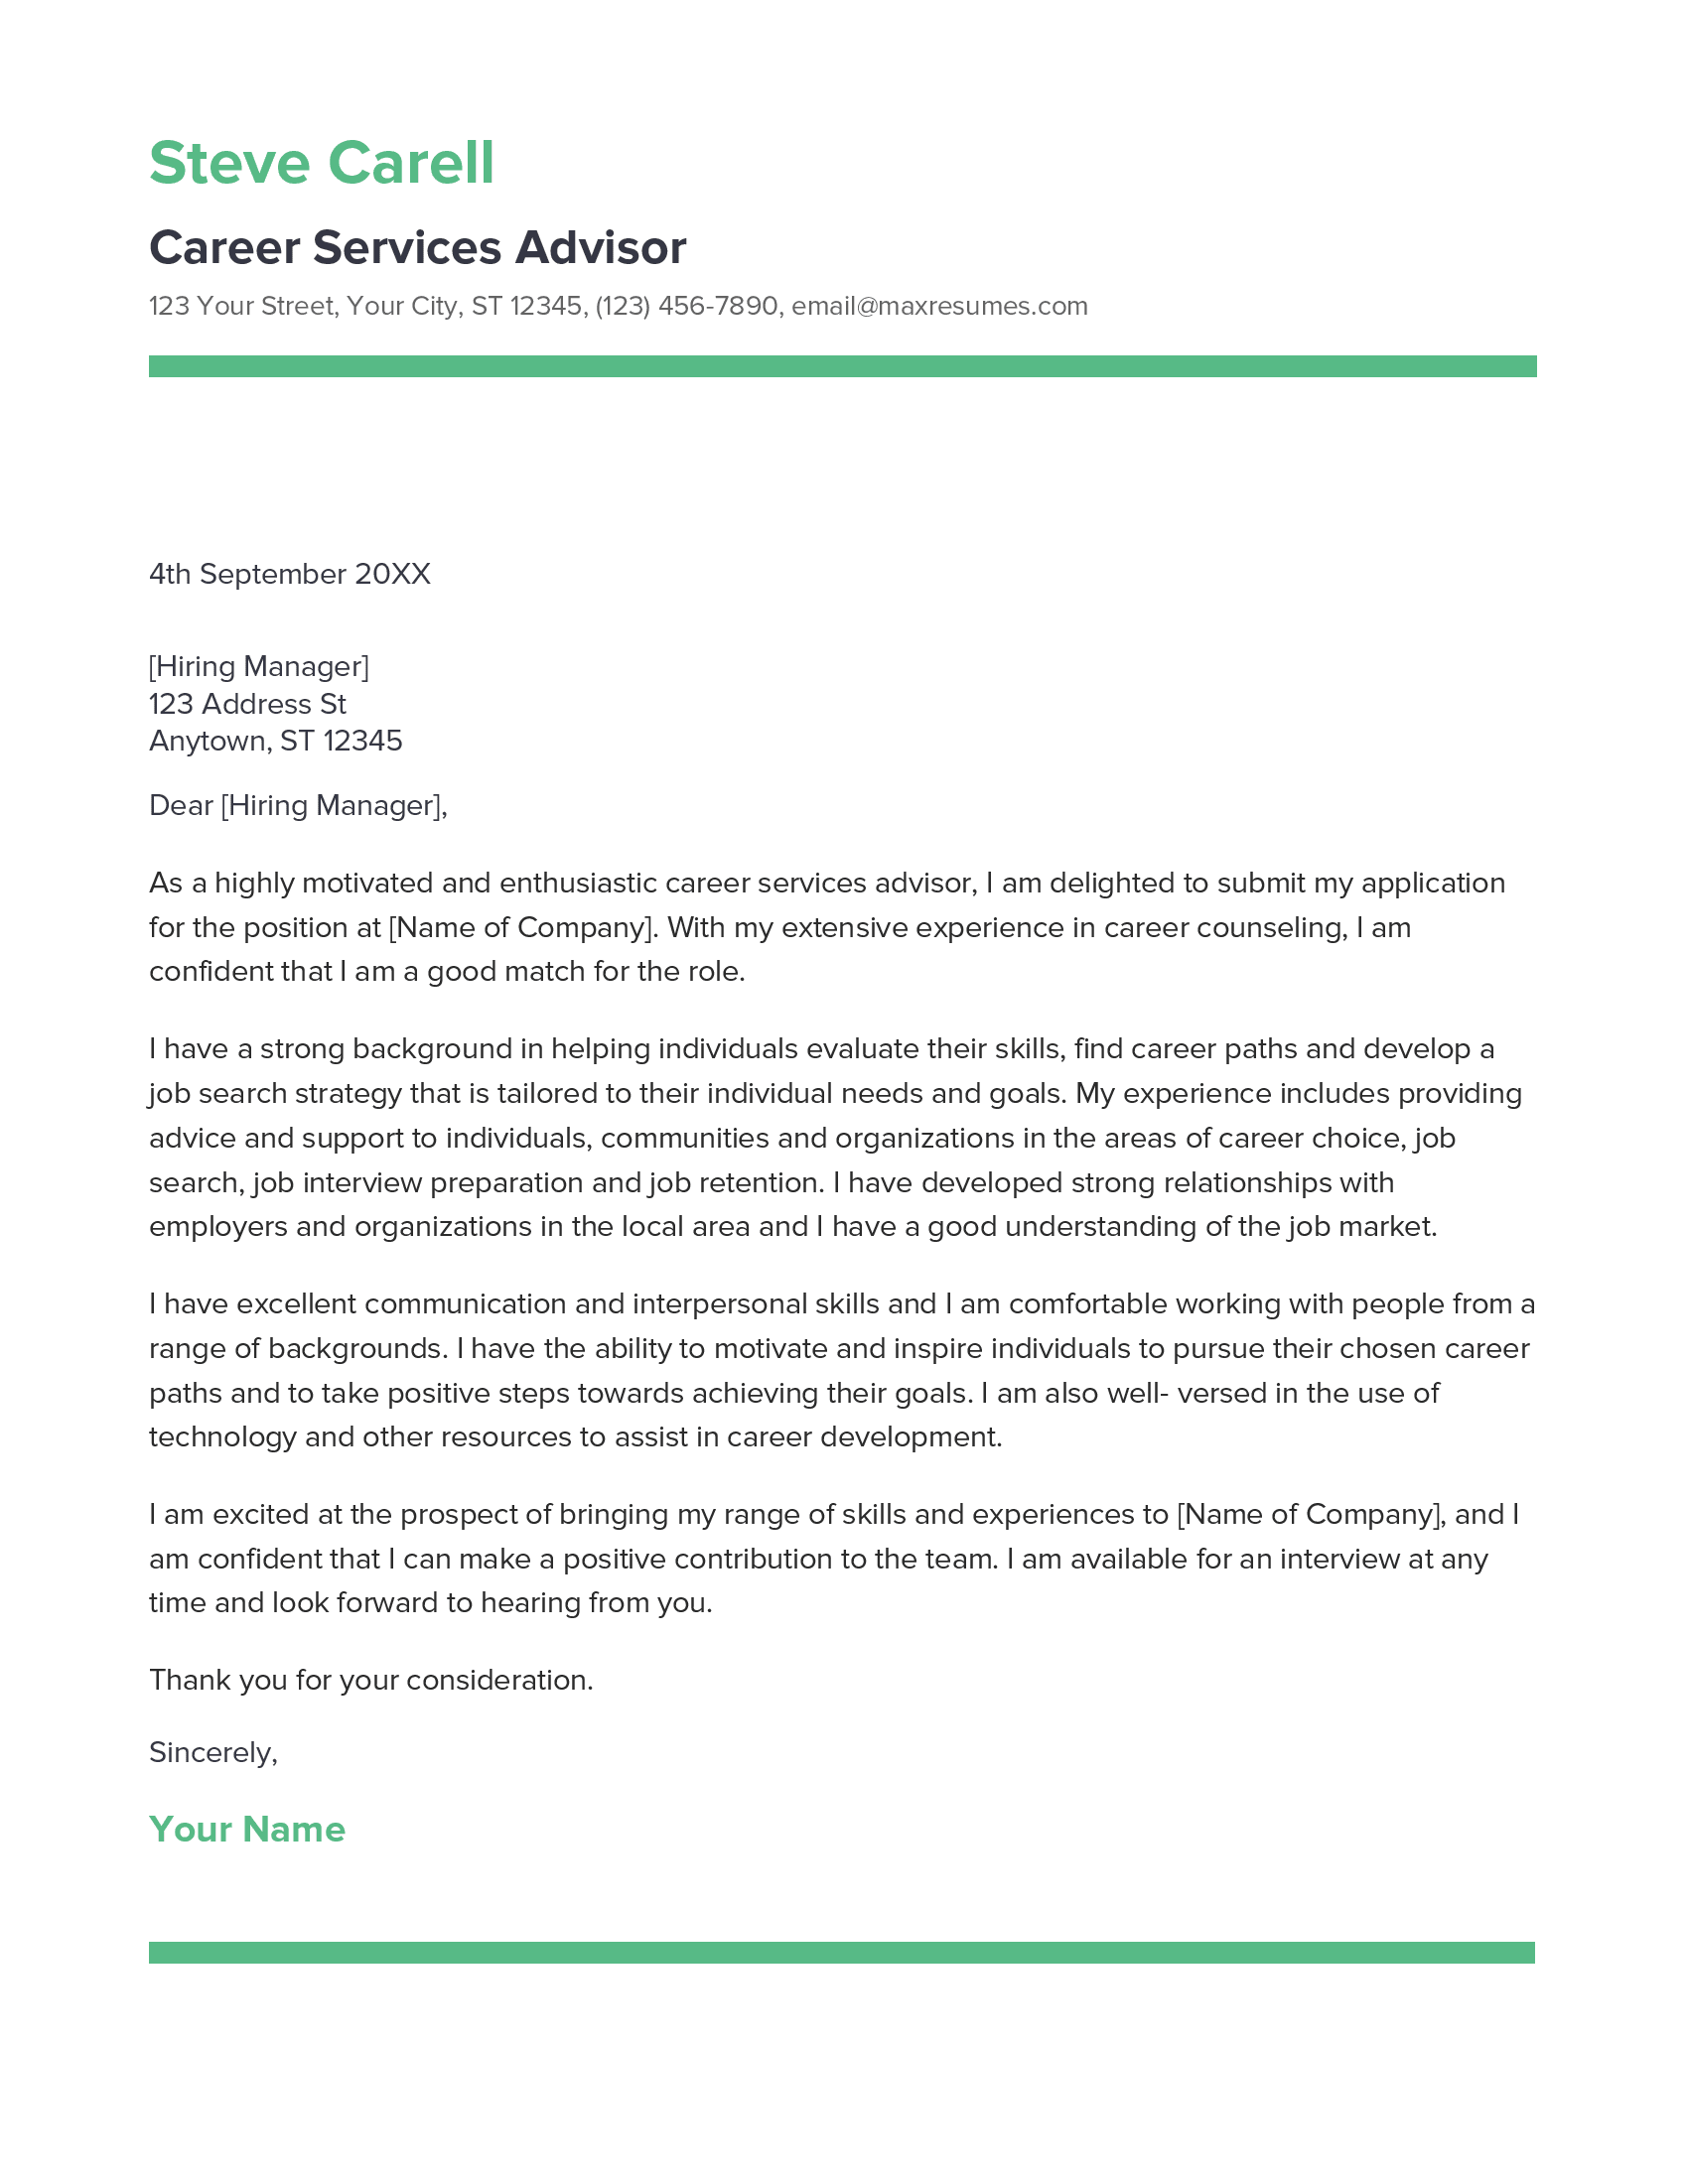 Career Services Advisor Cover Letter Example